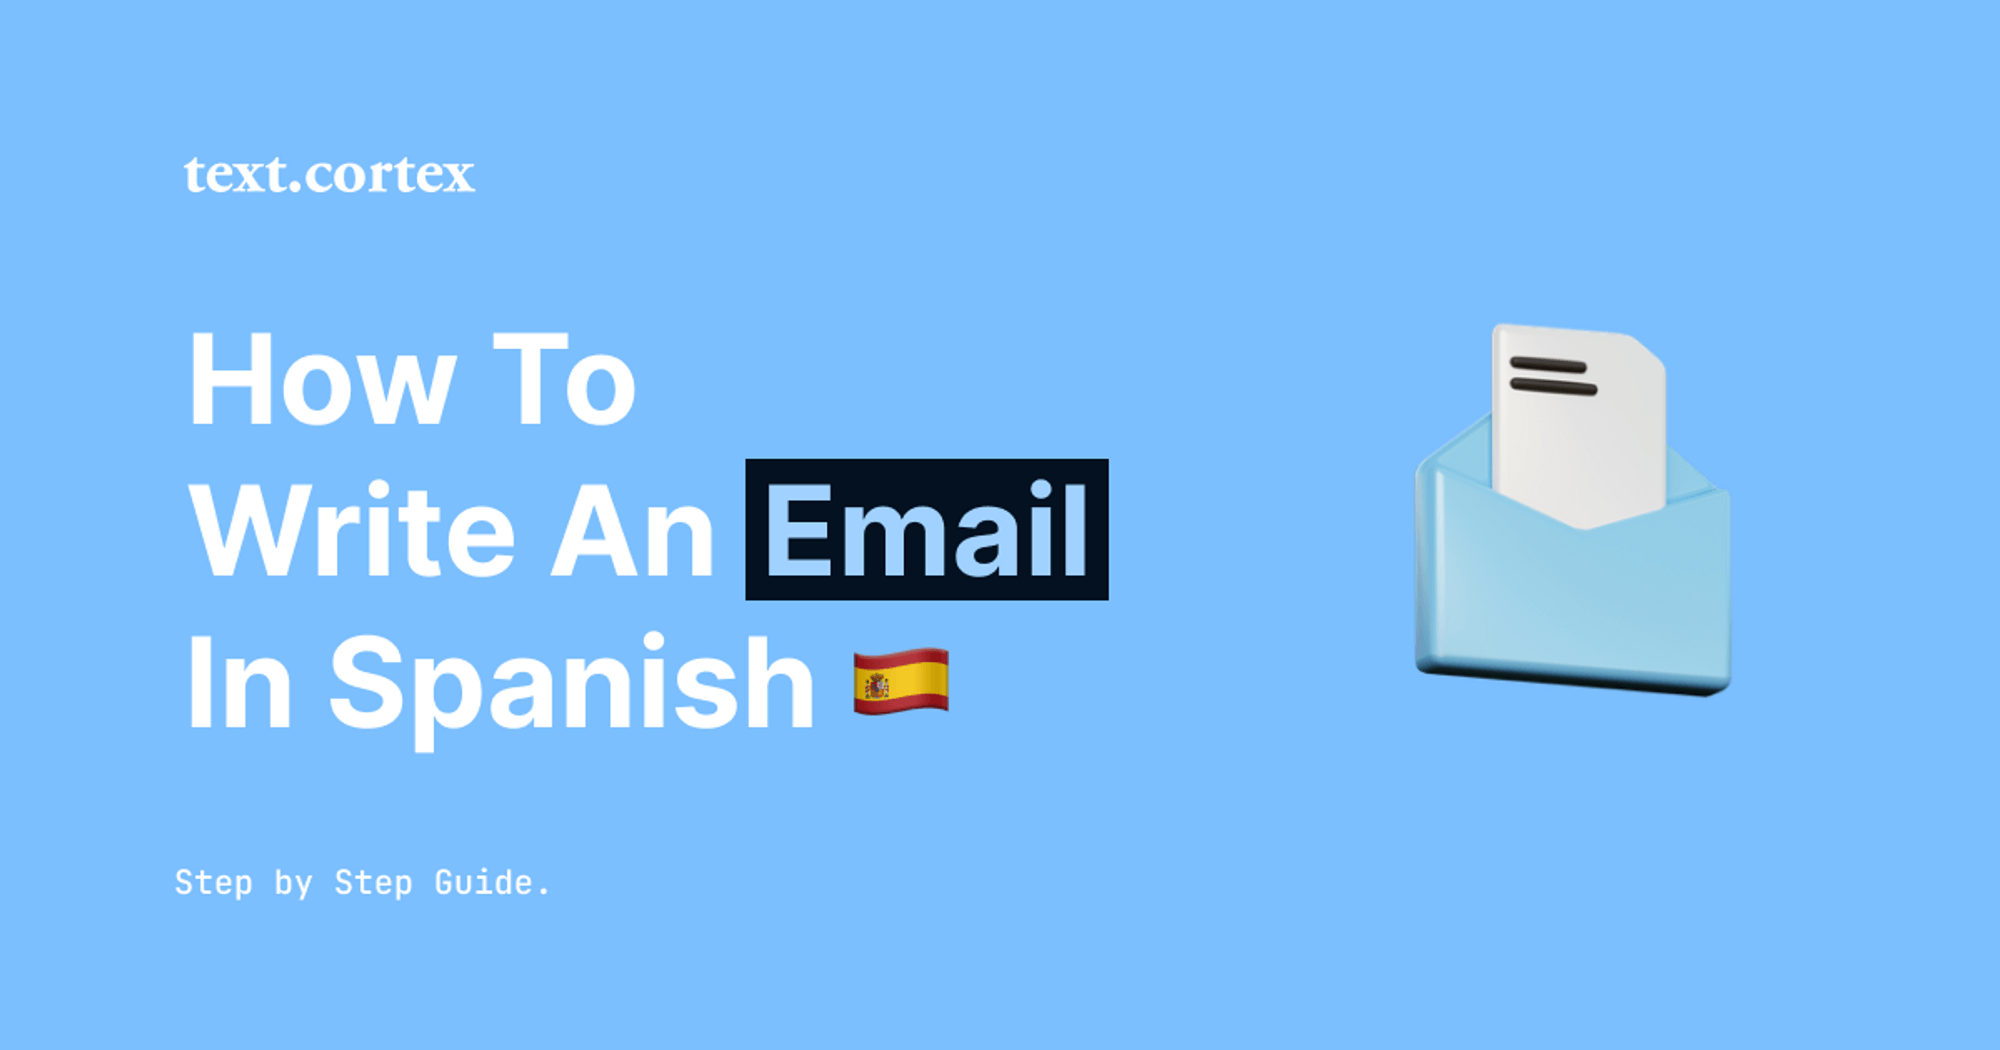 How To Write an Email in Spanish - Step-by-Step Guide